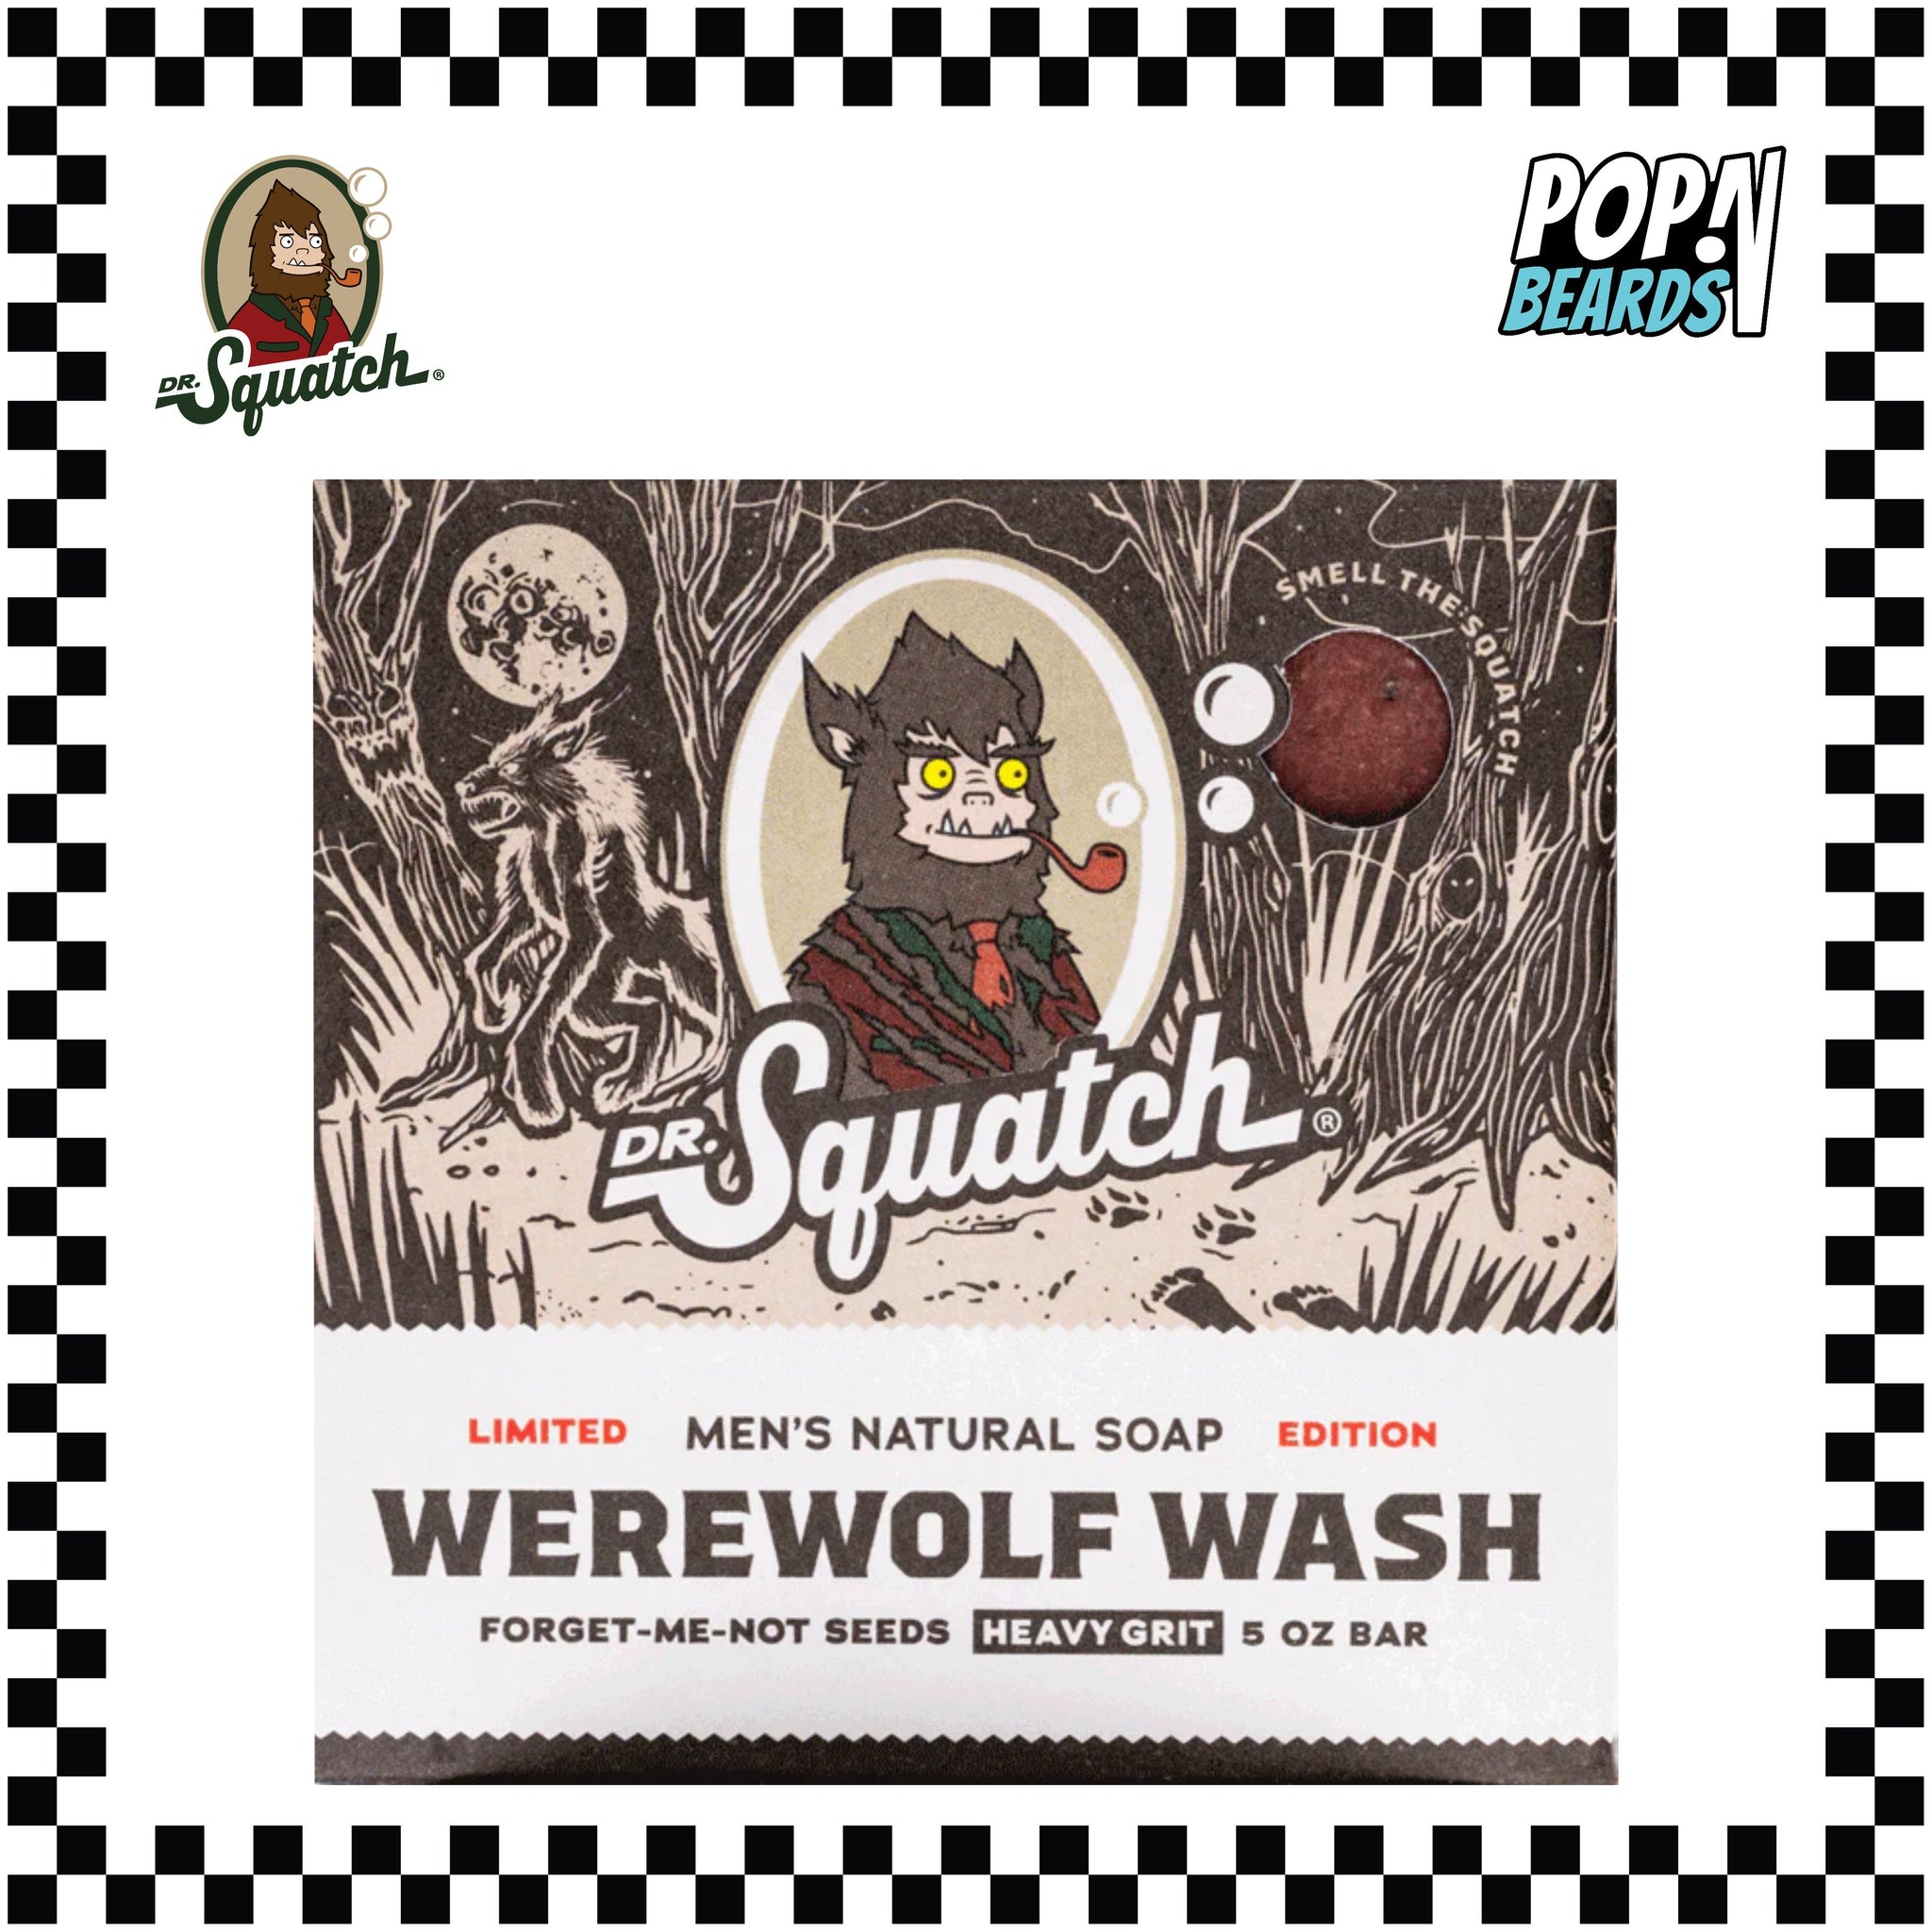 Is Dr. Squatch Honestly Any Better Than Generic Body Wash? Find Out Here -  Popdust